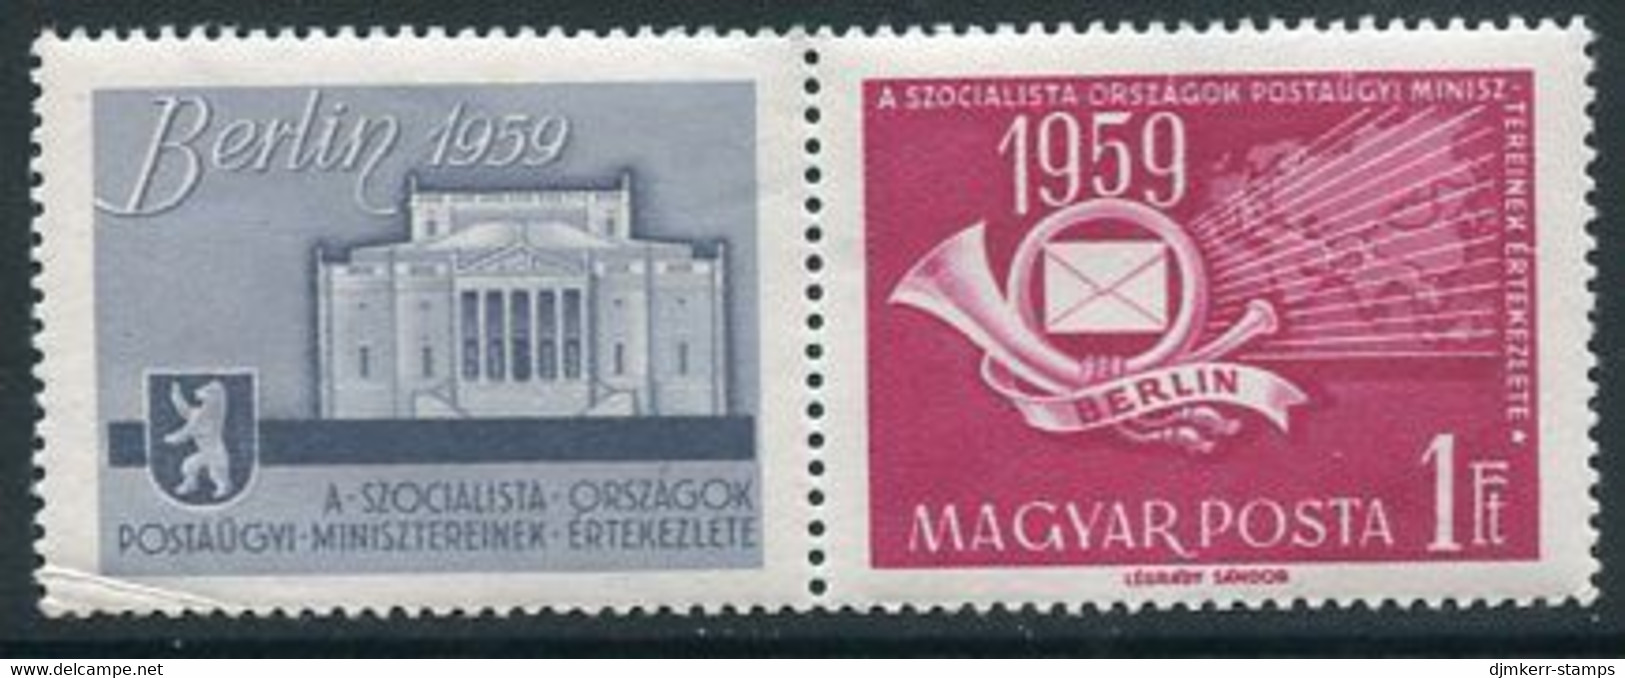 HUNGARY 1959 Socialist Minister's Postal Conference   MNH / **.  Michel 1592 - Ungebraucht